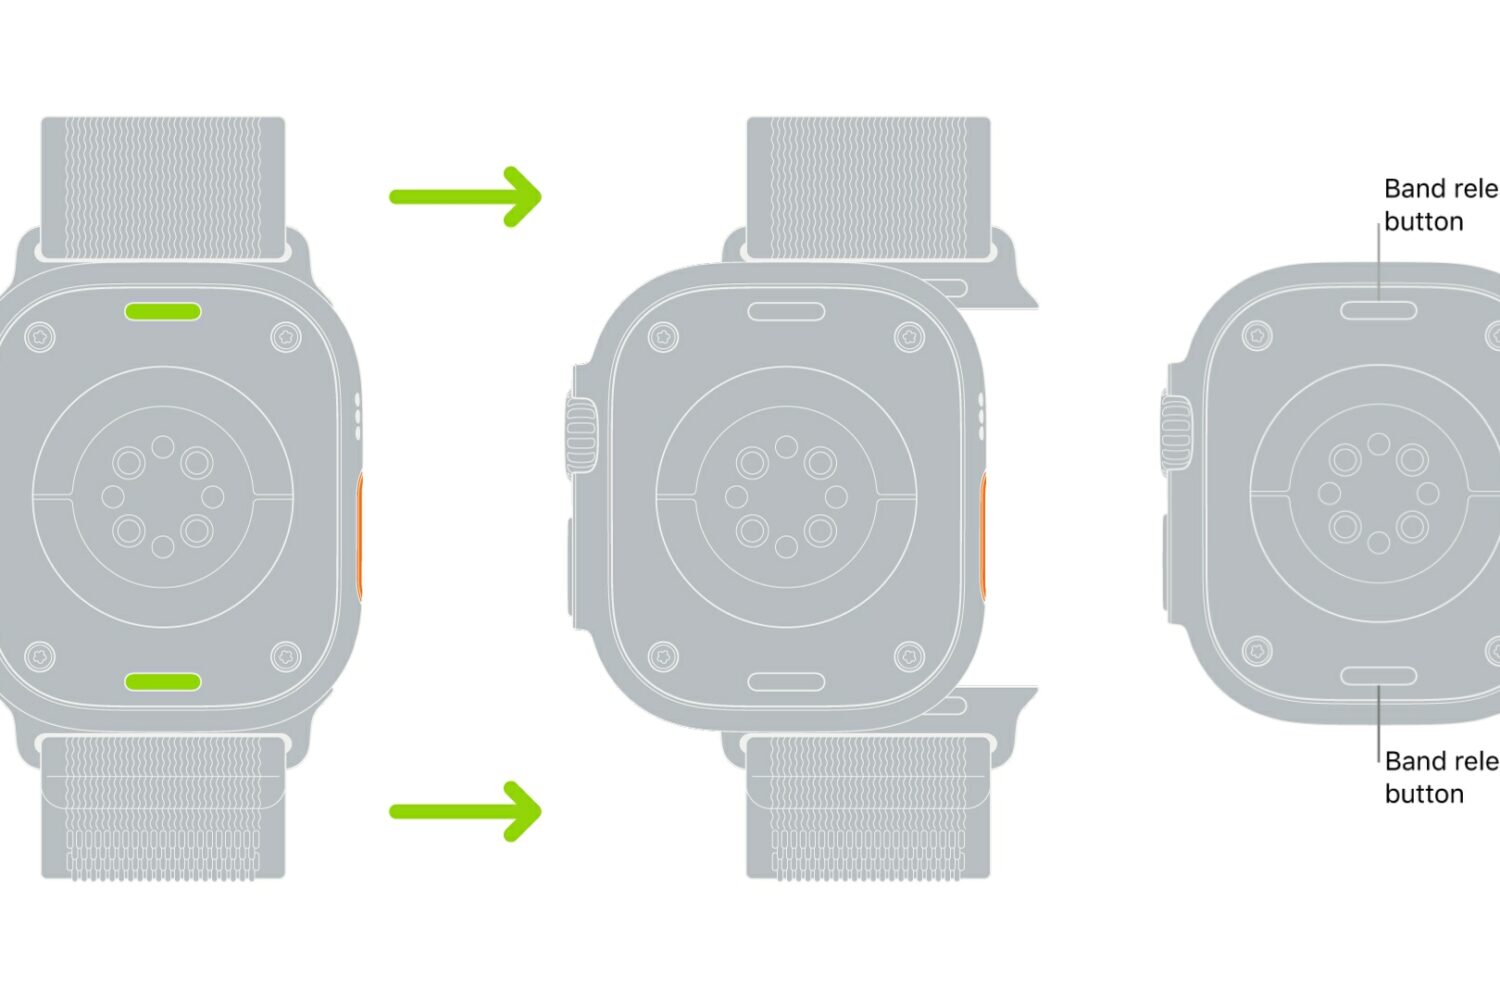 Illustration showing how to remove an Apple Watch band